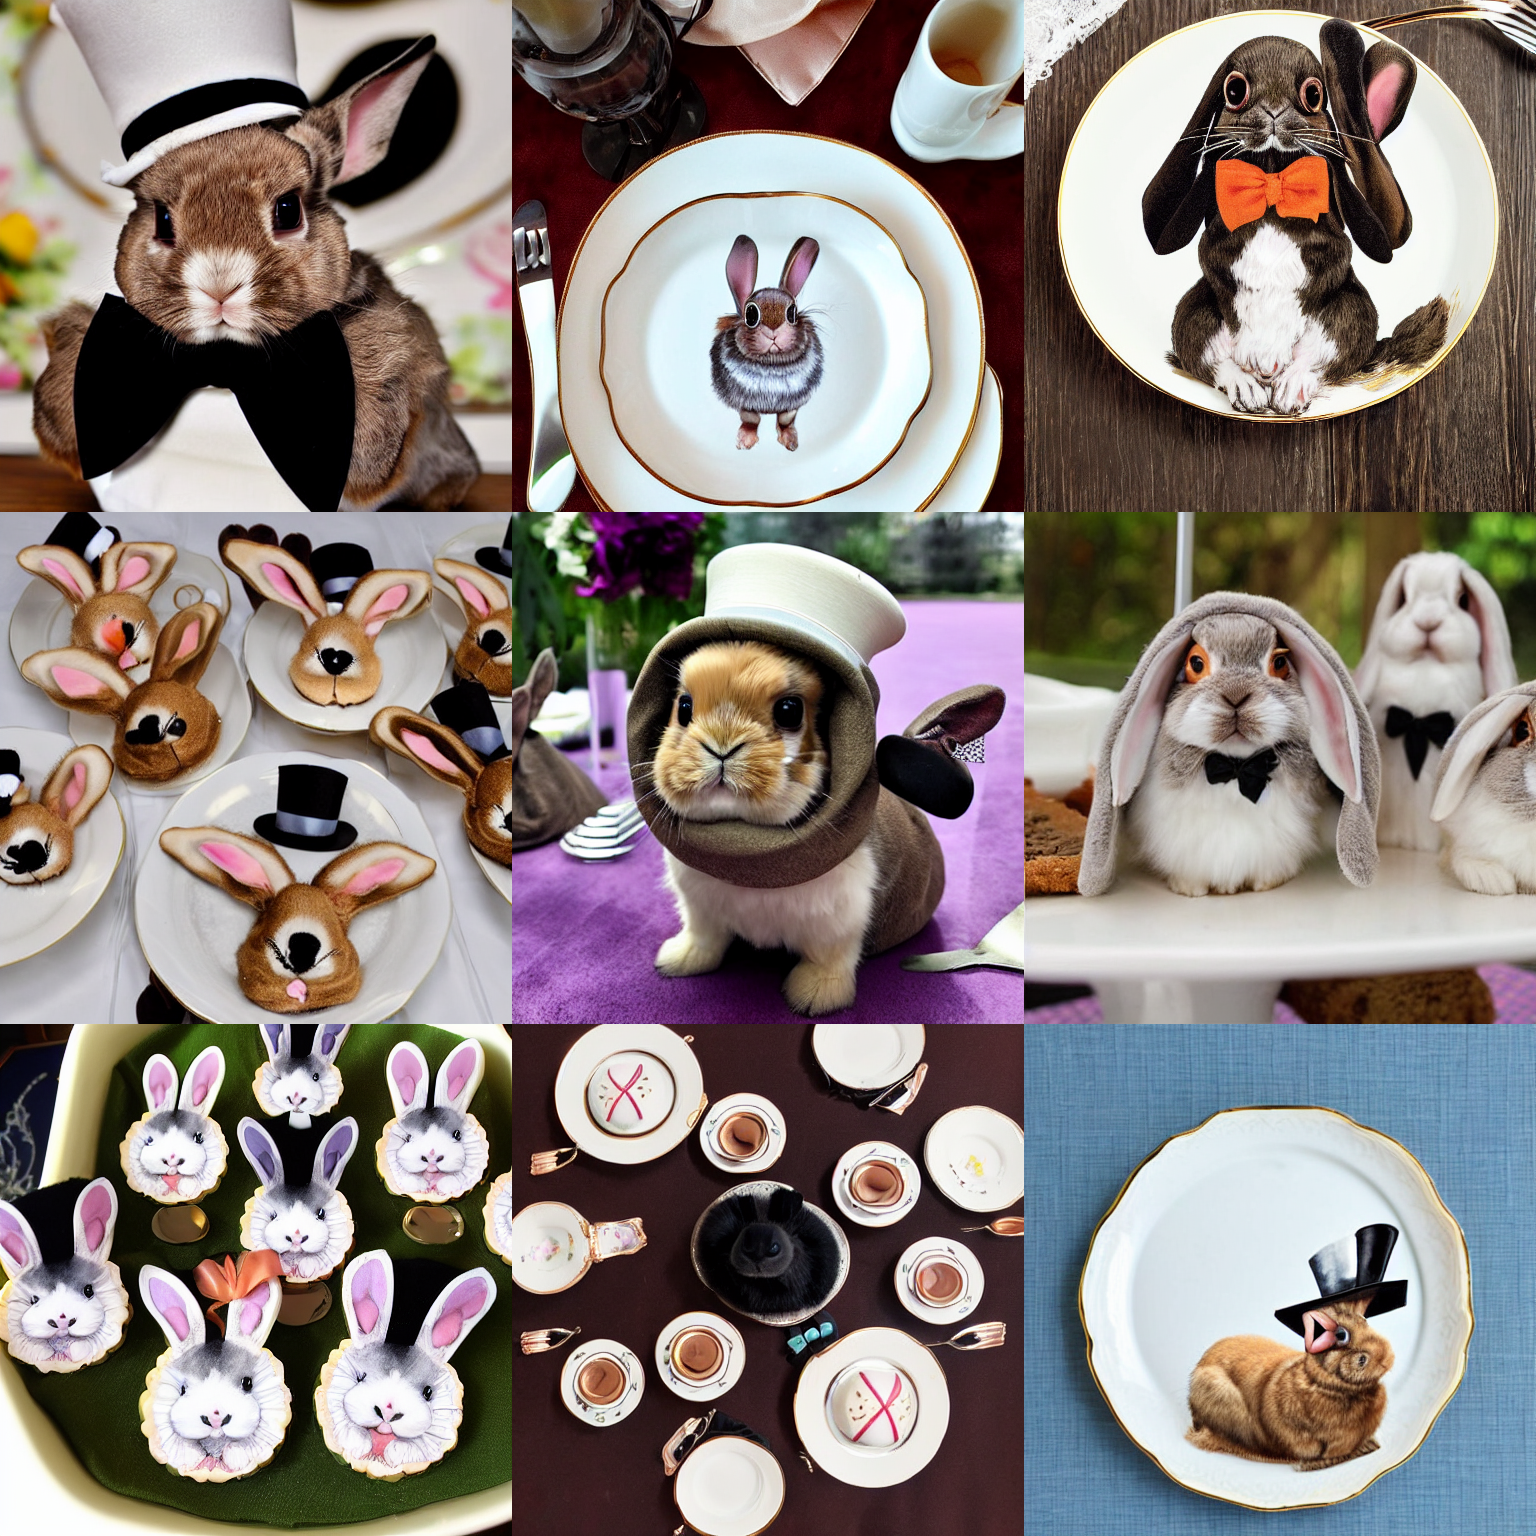 holland lop flop-eared bunnies wearing suits, monocles, and top hats, attending high tea, fine china, fancy desserts, elegant